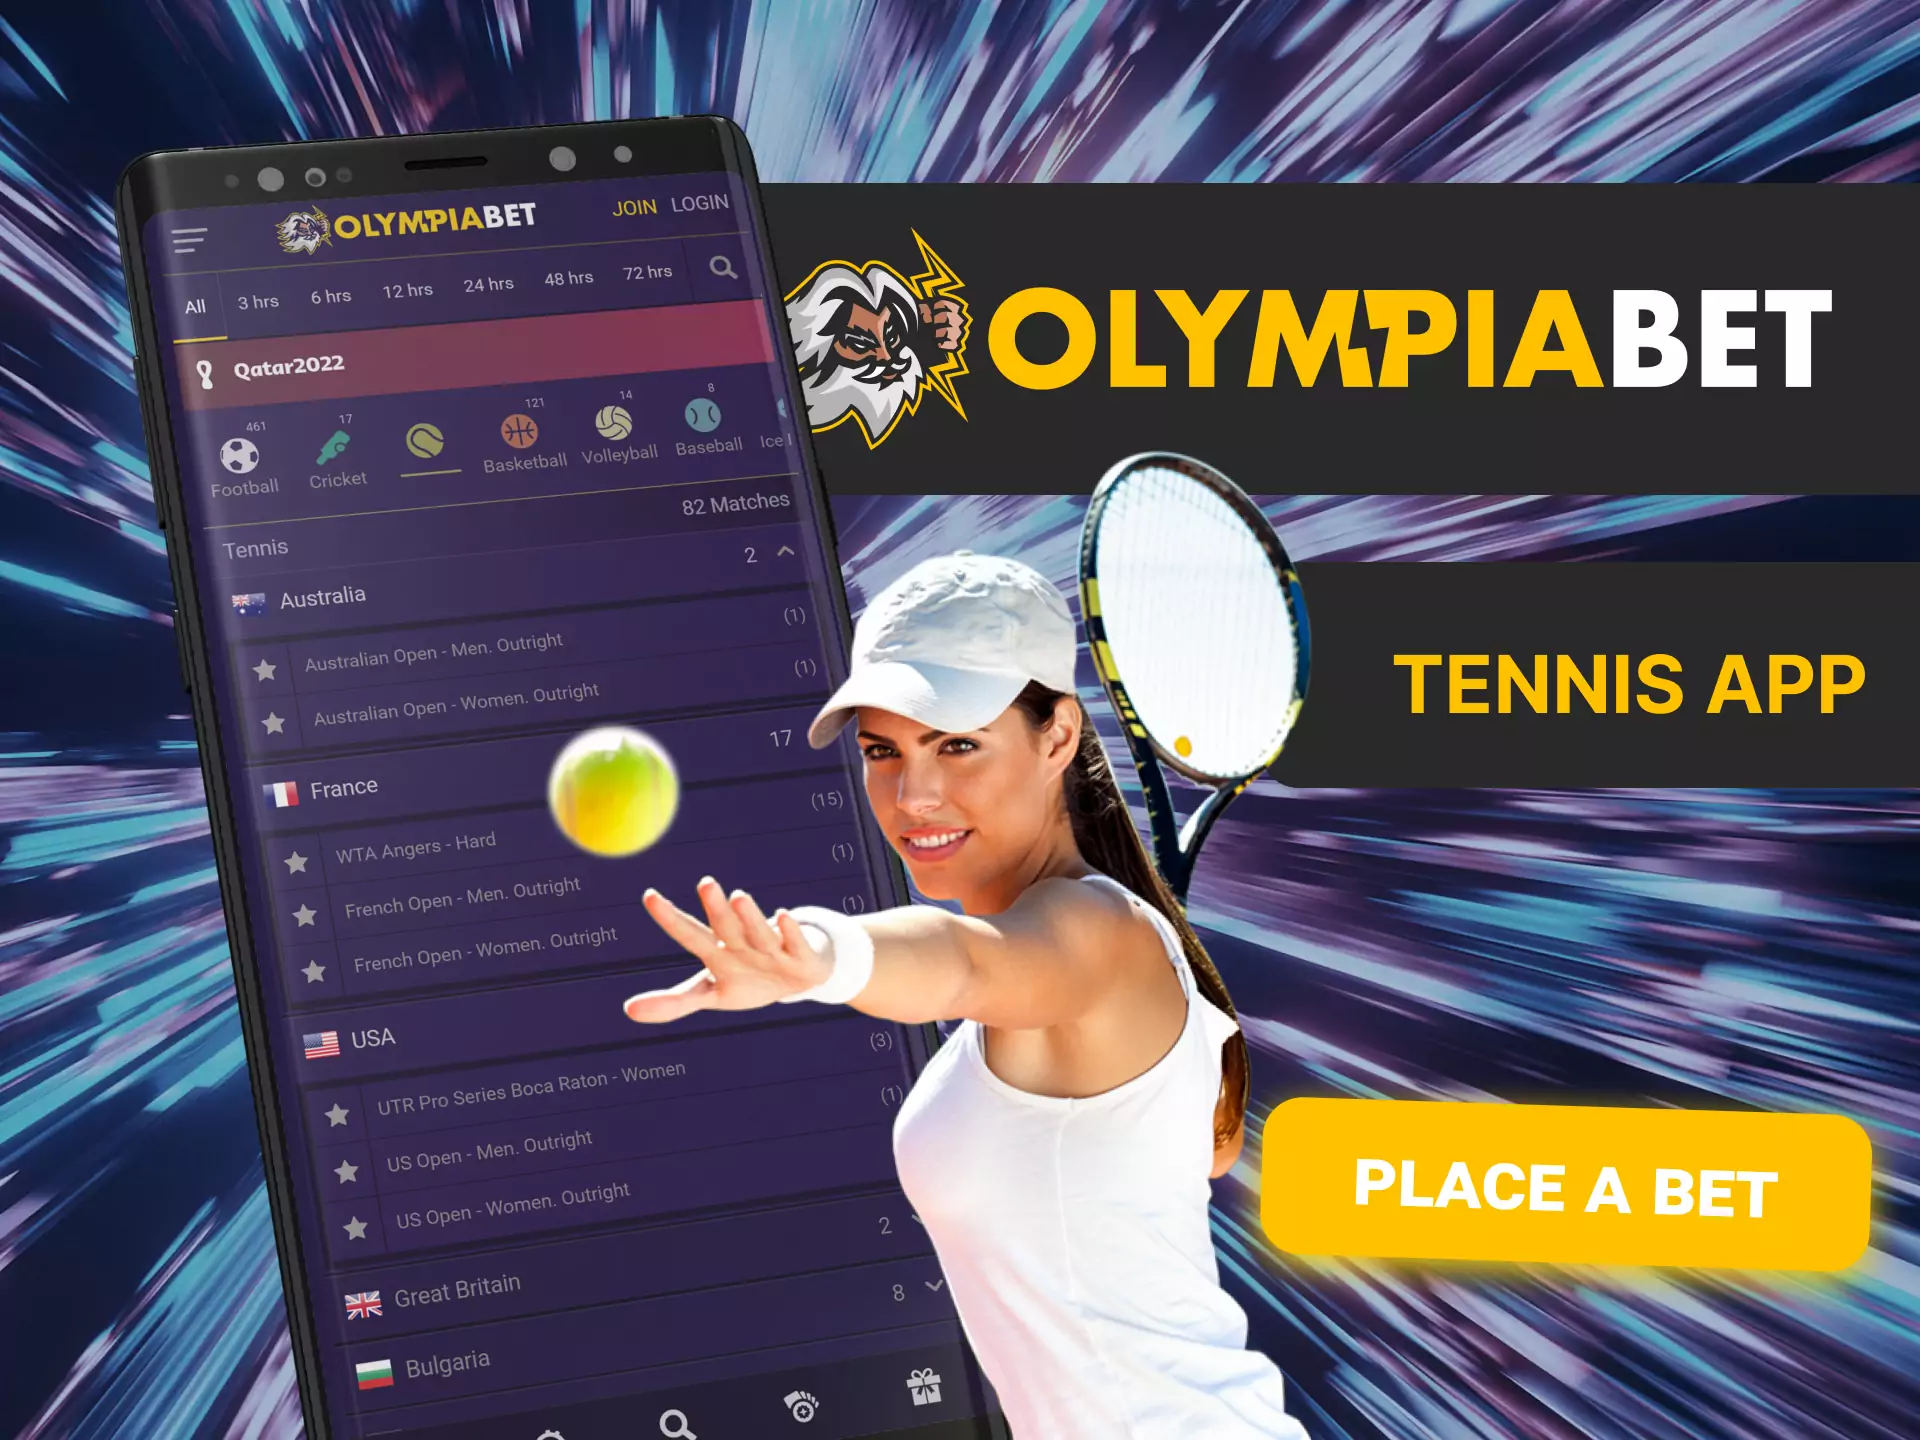 At OlympiaBet, place bets on various tennis sports events.